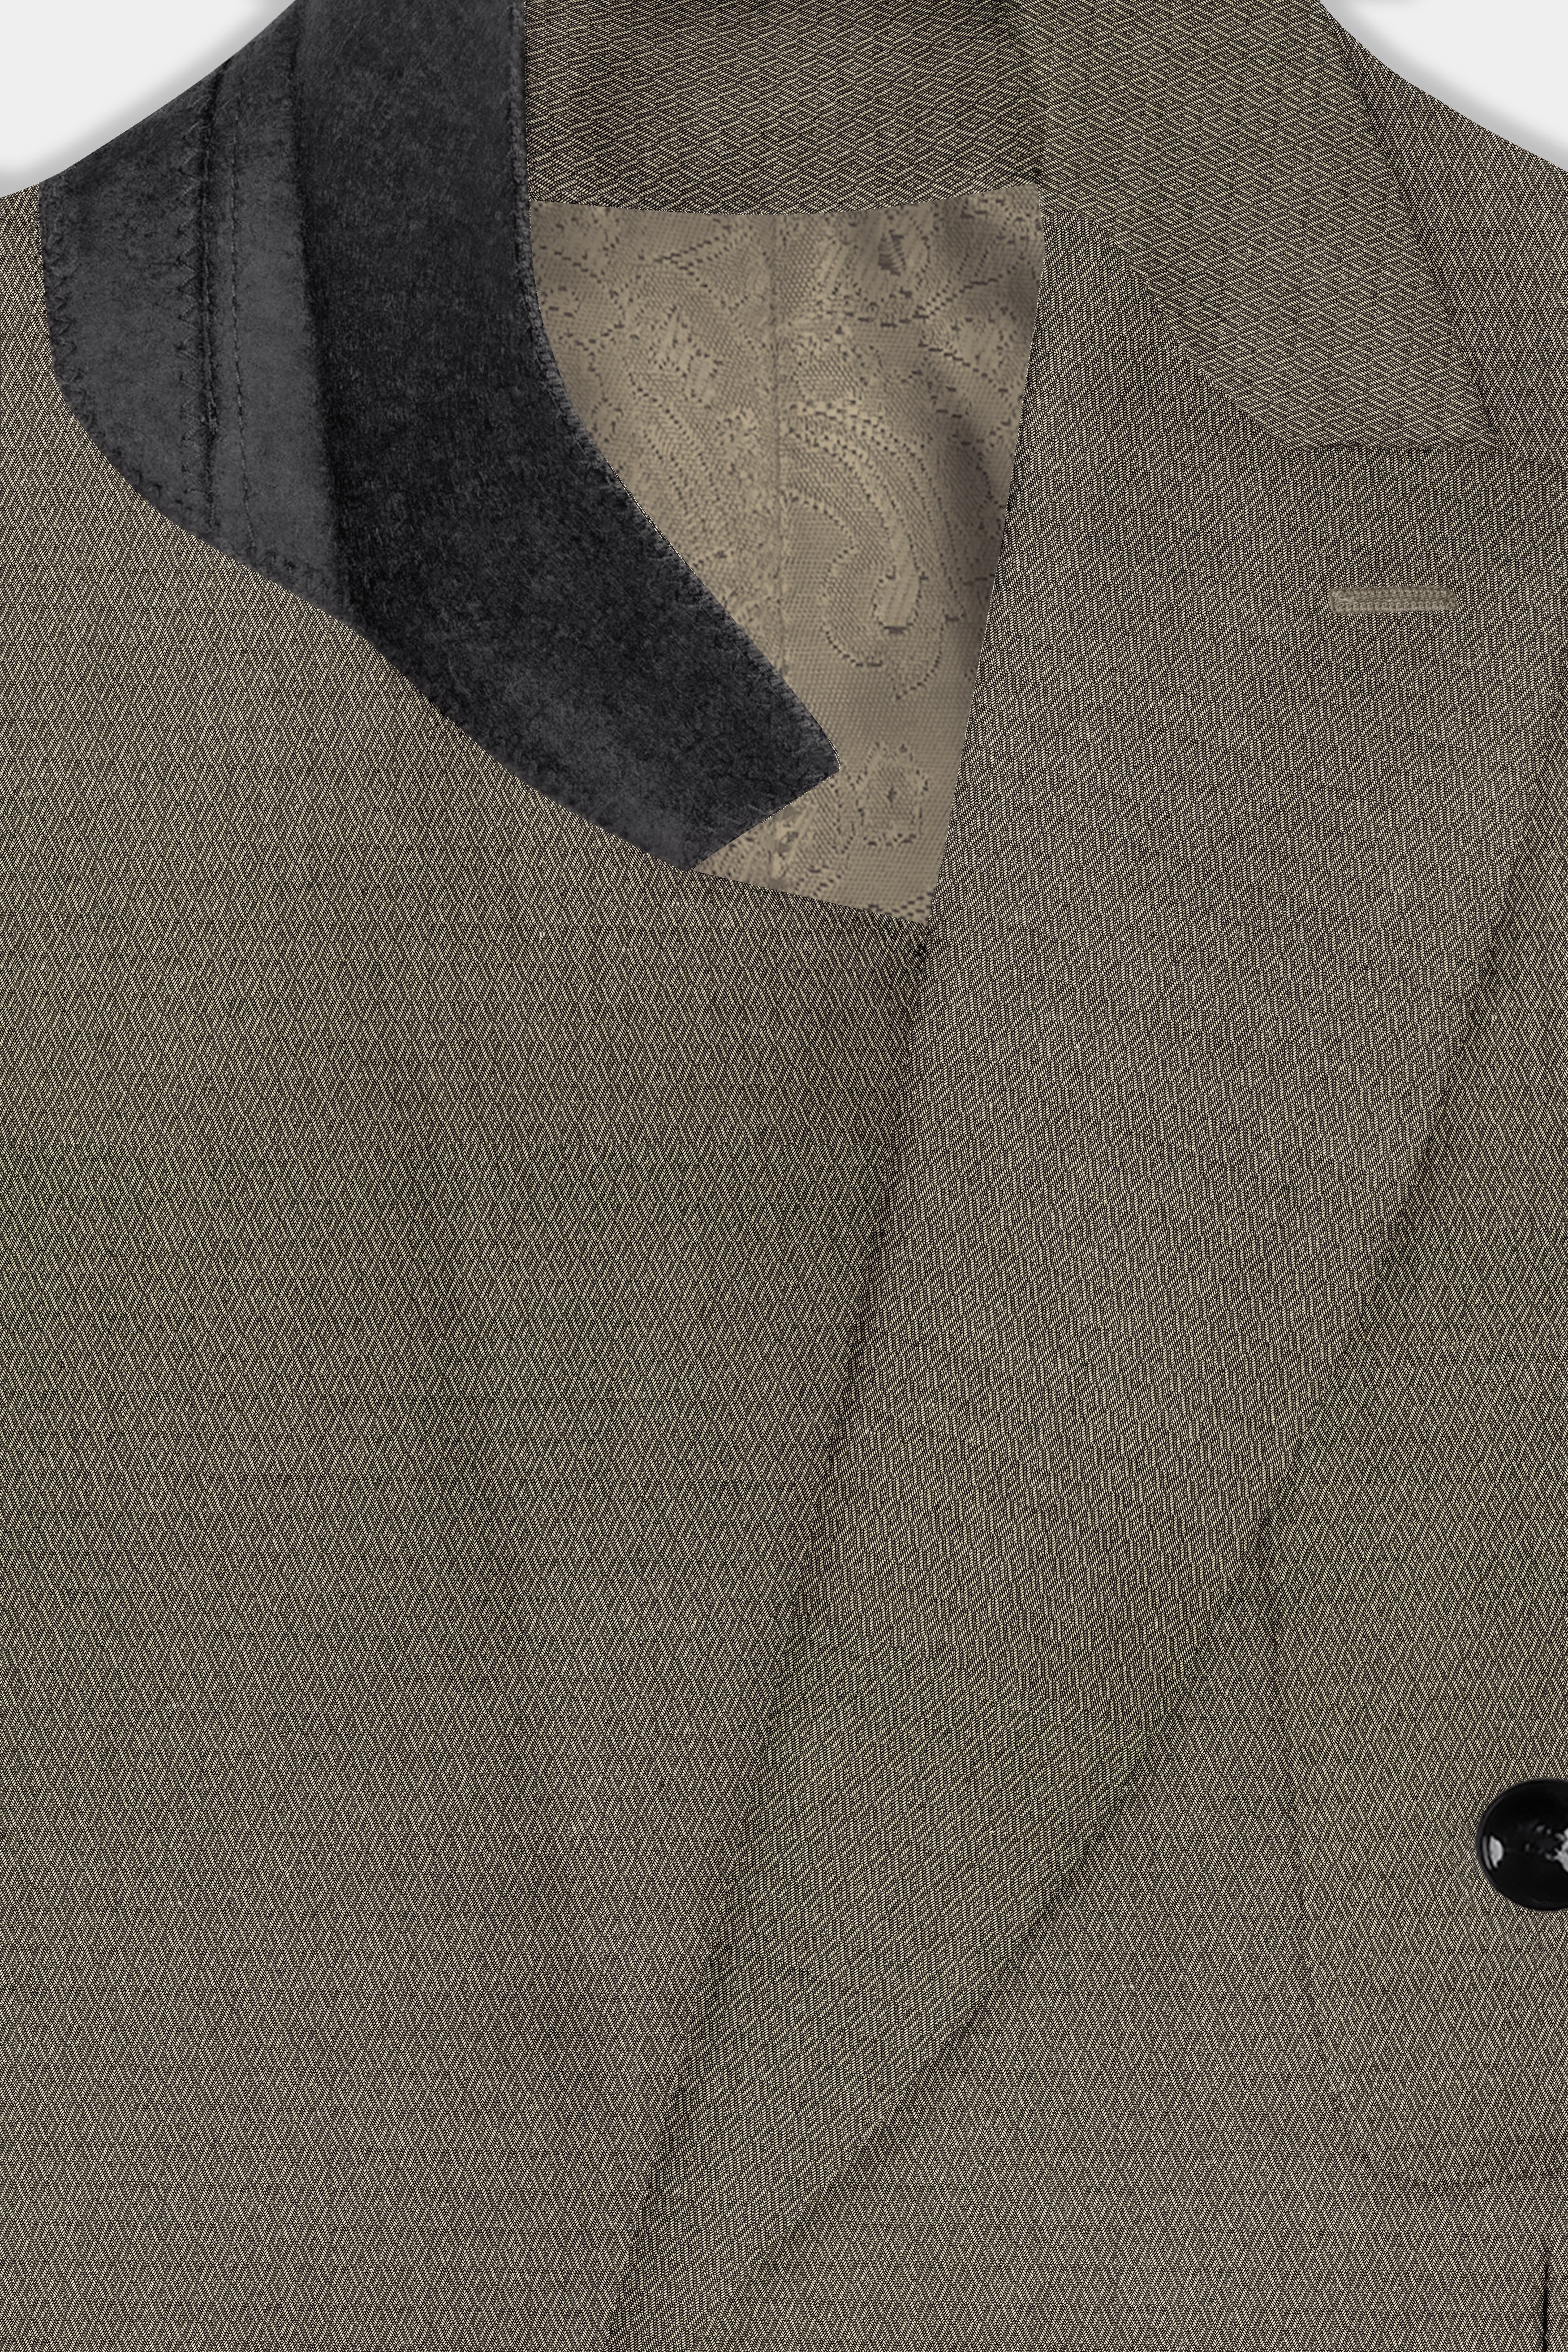 Wenge Brown Dobby Textured wool blend Double breasted Blazer